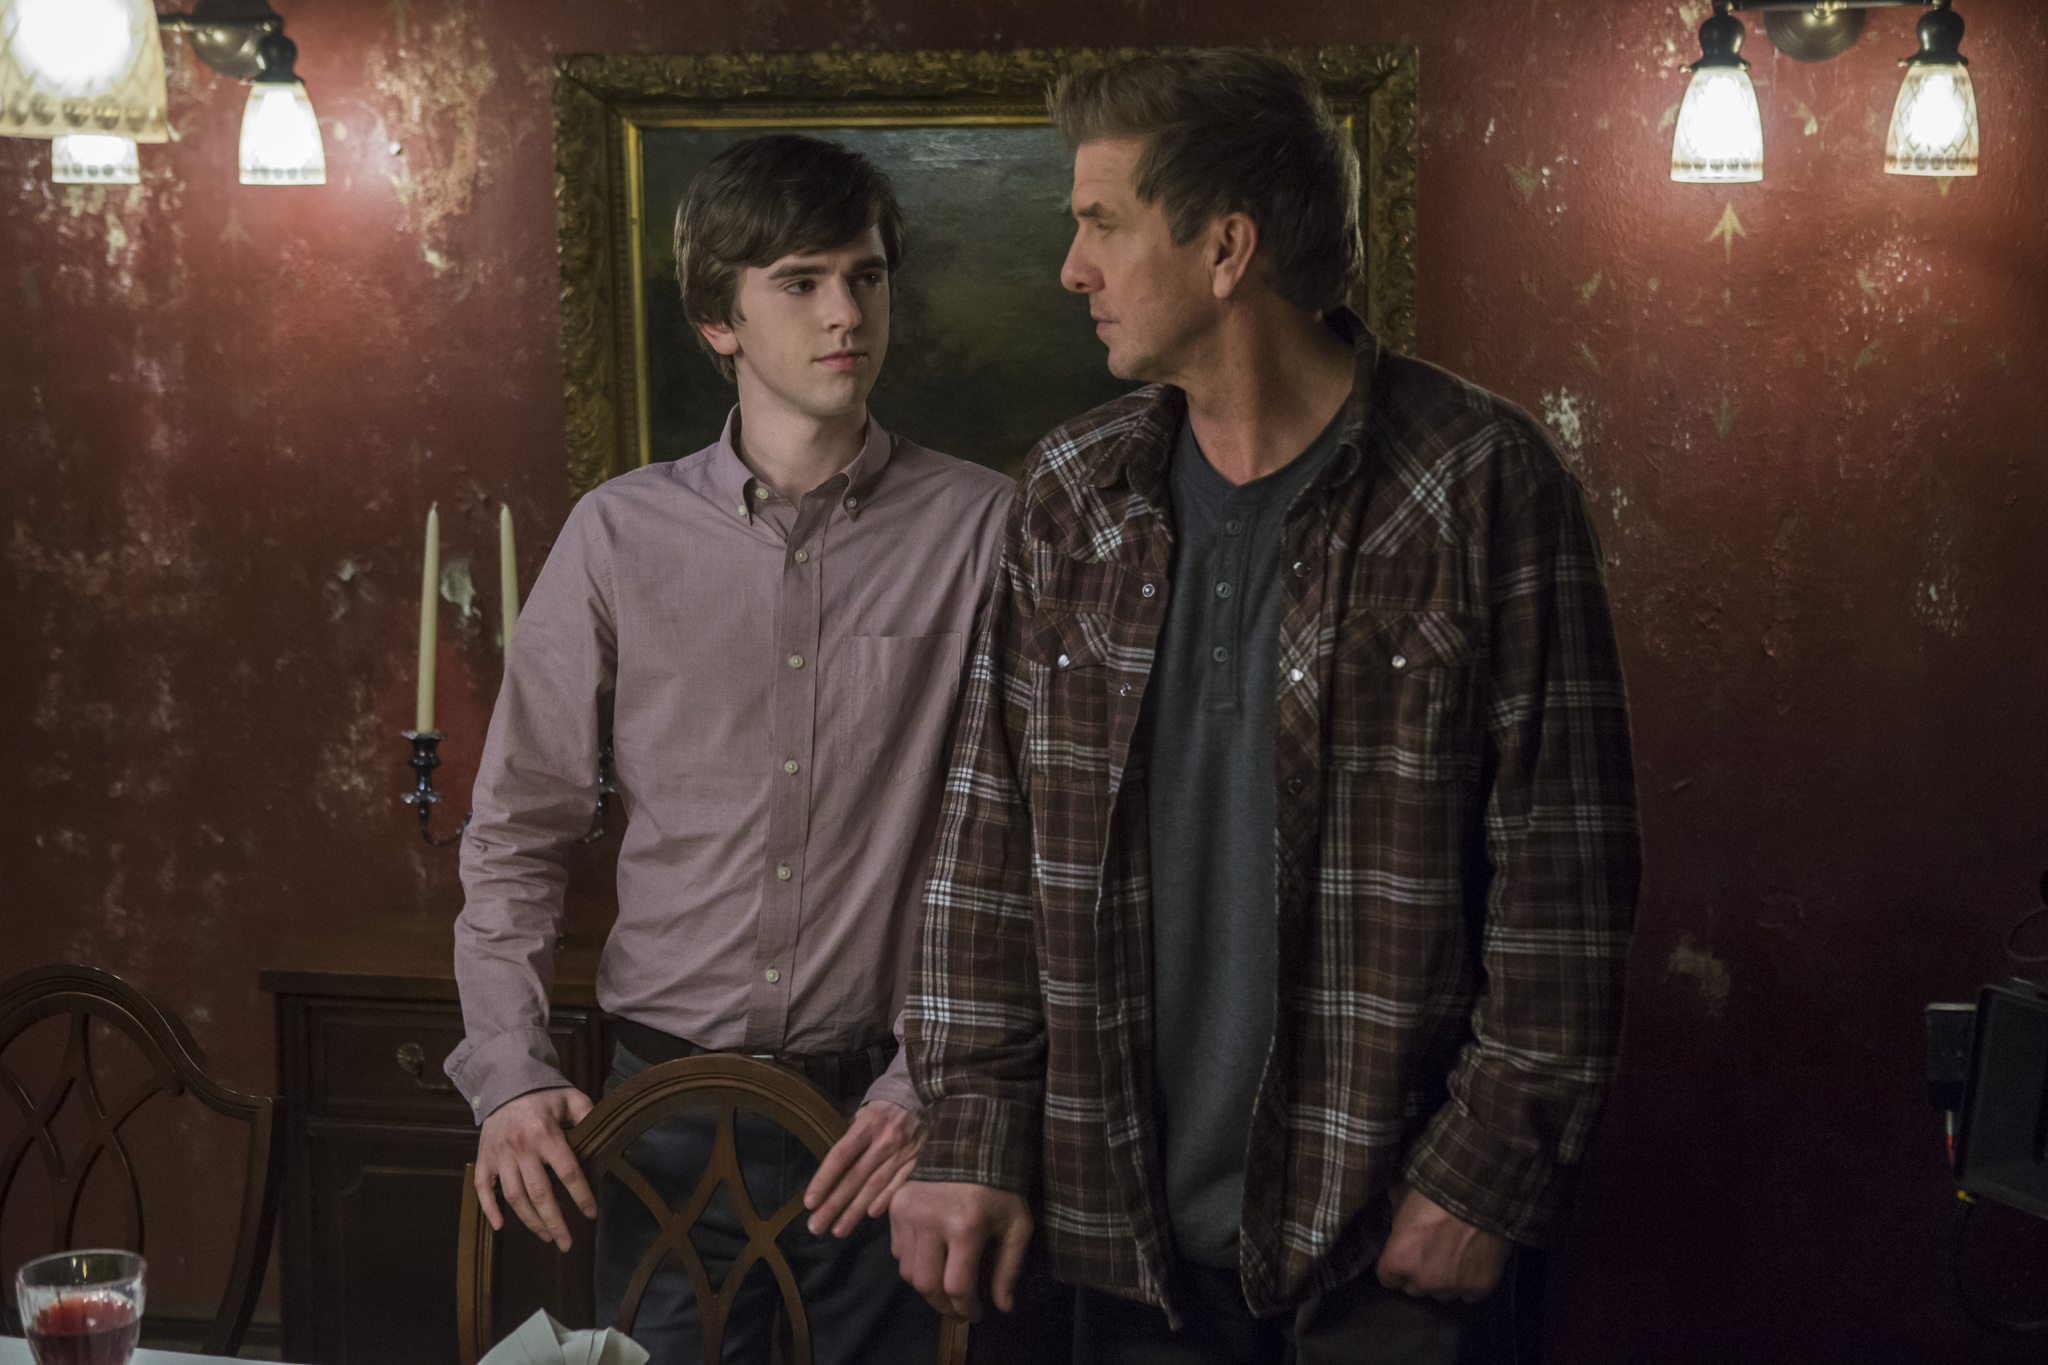 Still of Freddie Highmore and Kenny Johnson in Bates Motel (2013)